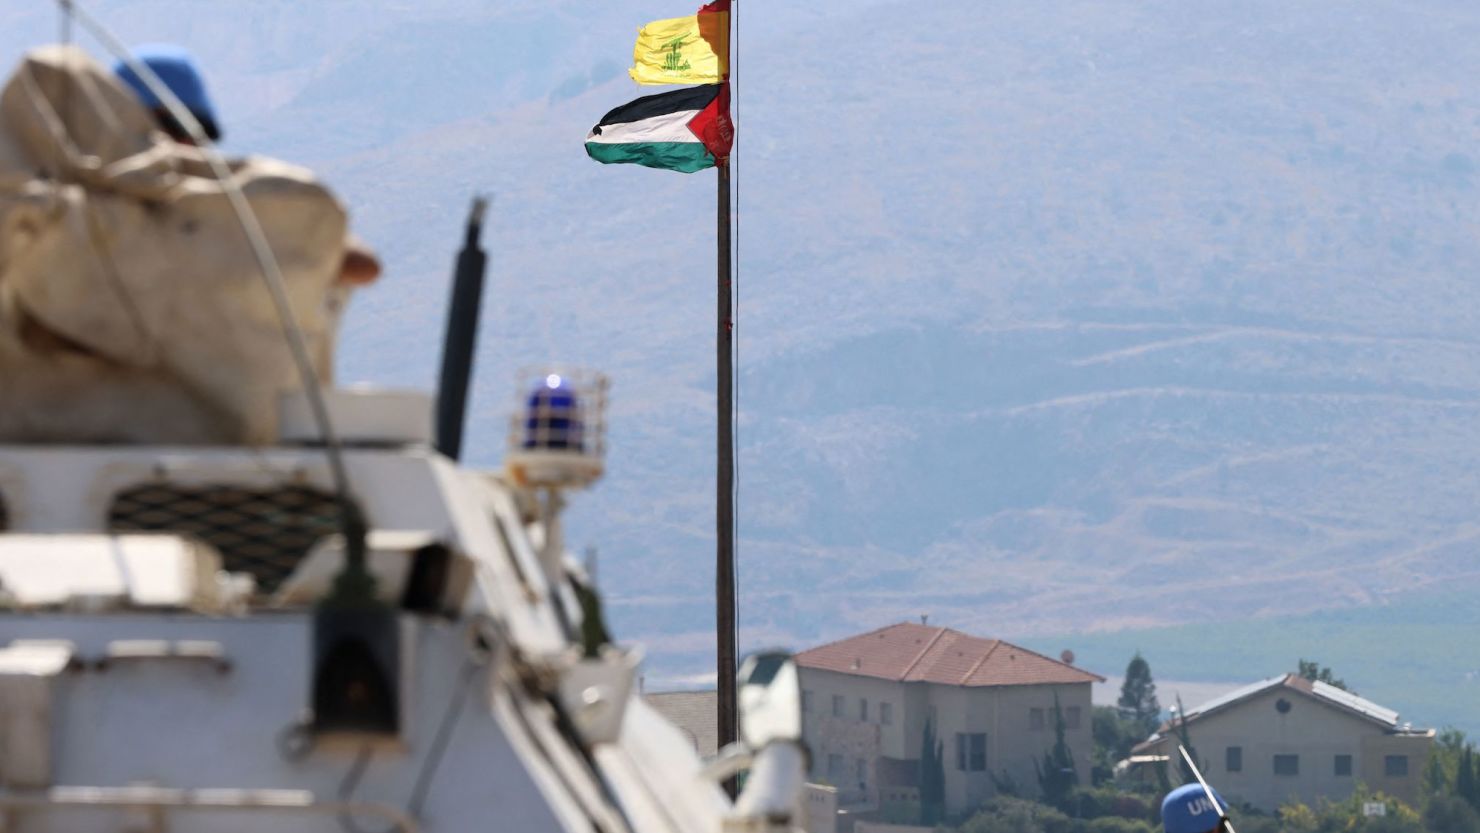 The Palestinian flag and the flag of Hezbollah wave in the wind on a pole as peacekeepers from the United Nations Interim Force in Lebanon (UNIFIL) patrol the border area between Lebanon and Israel on Hamames hill in the Khiyam area of southern Lebanon, on October 13, 2023.